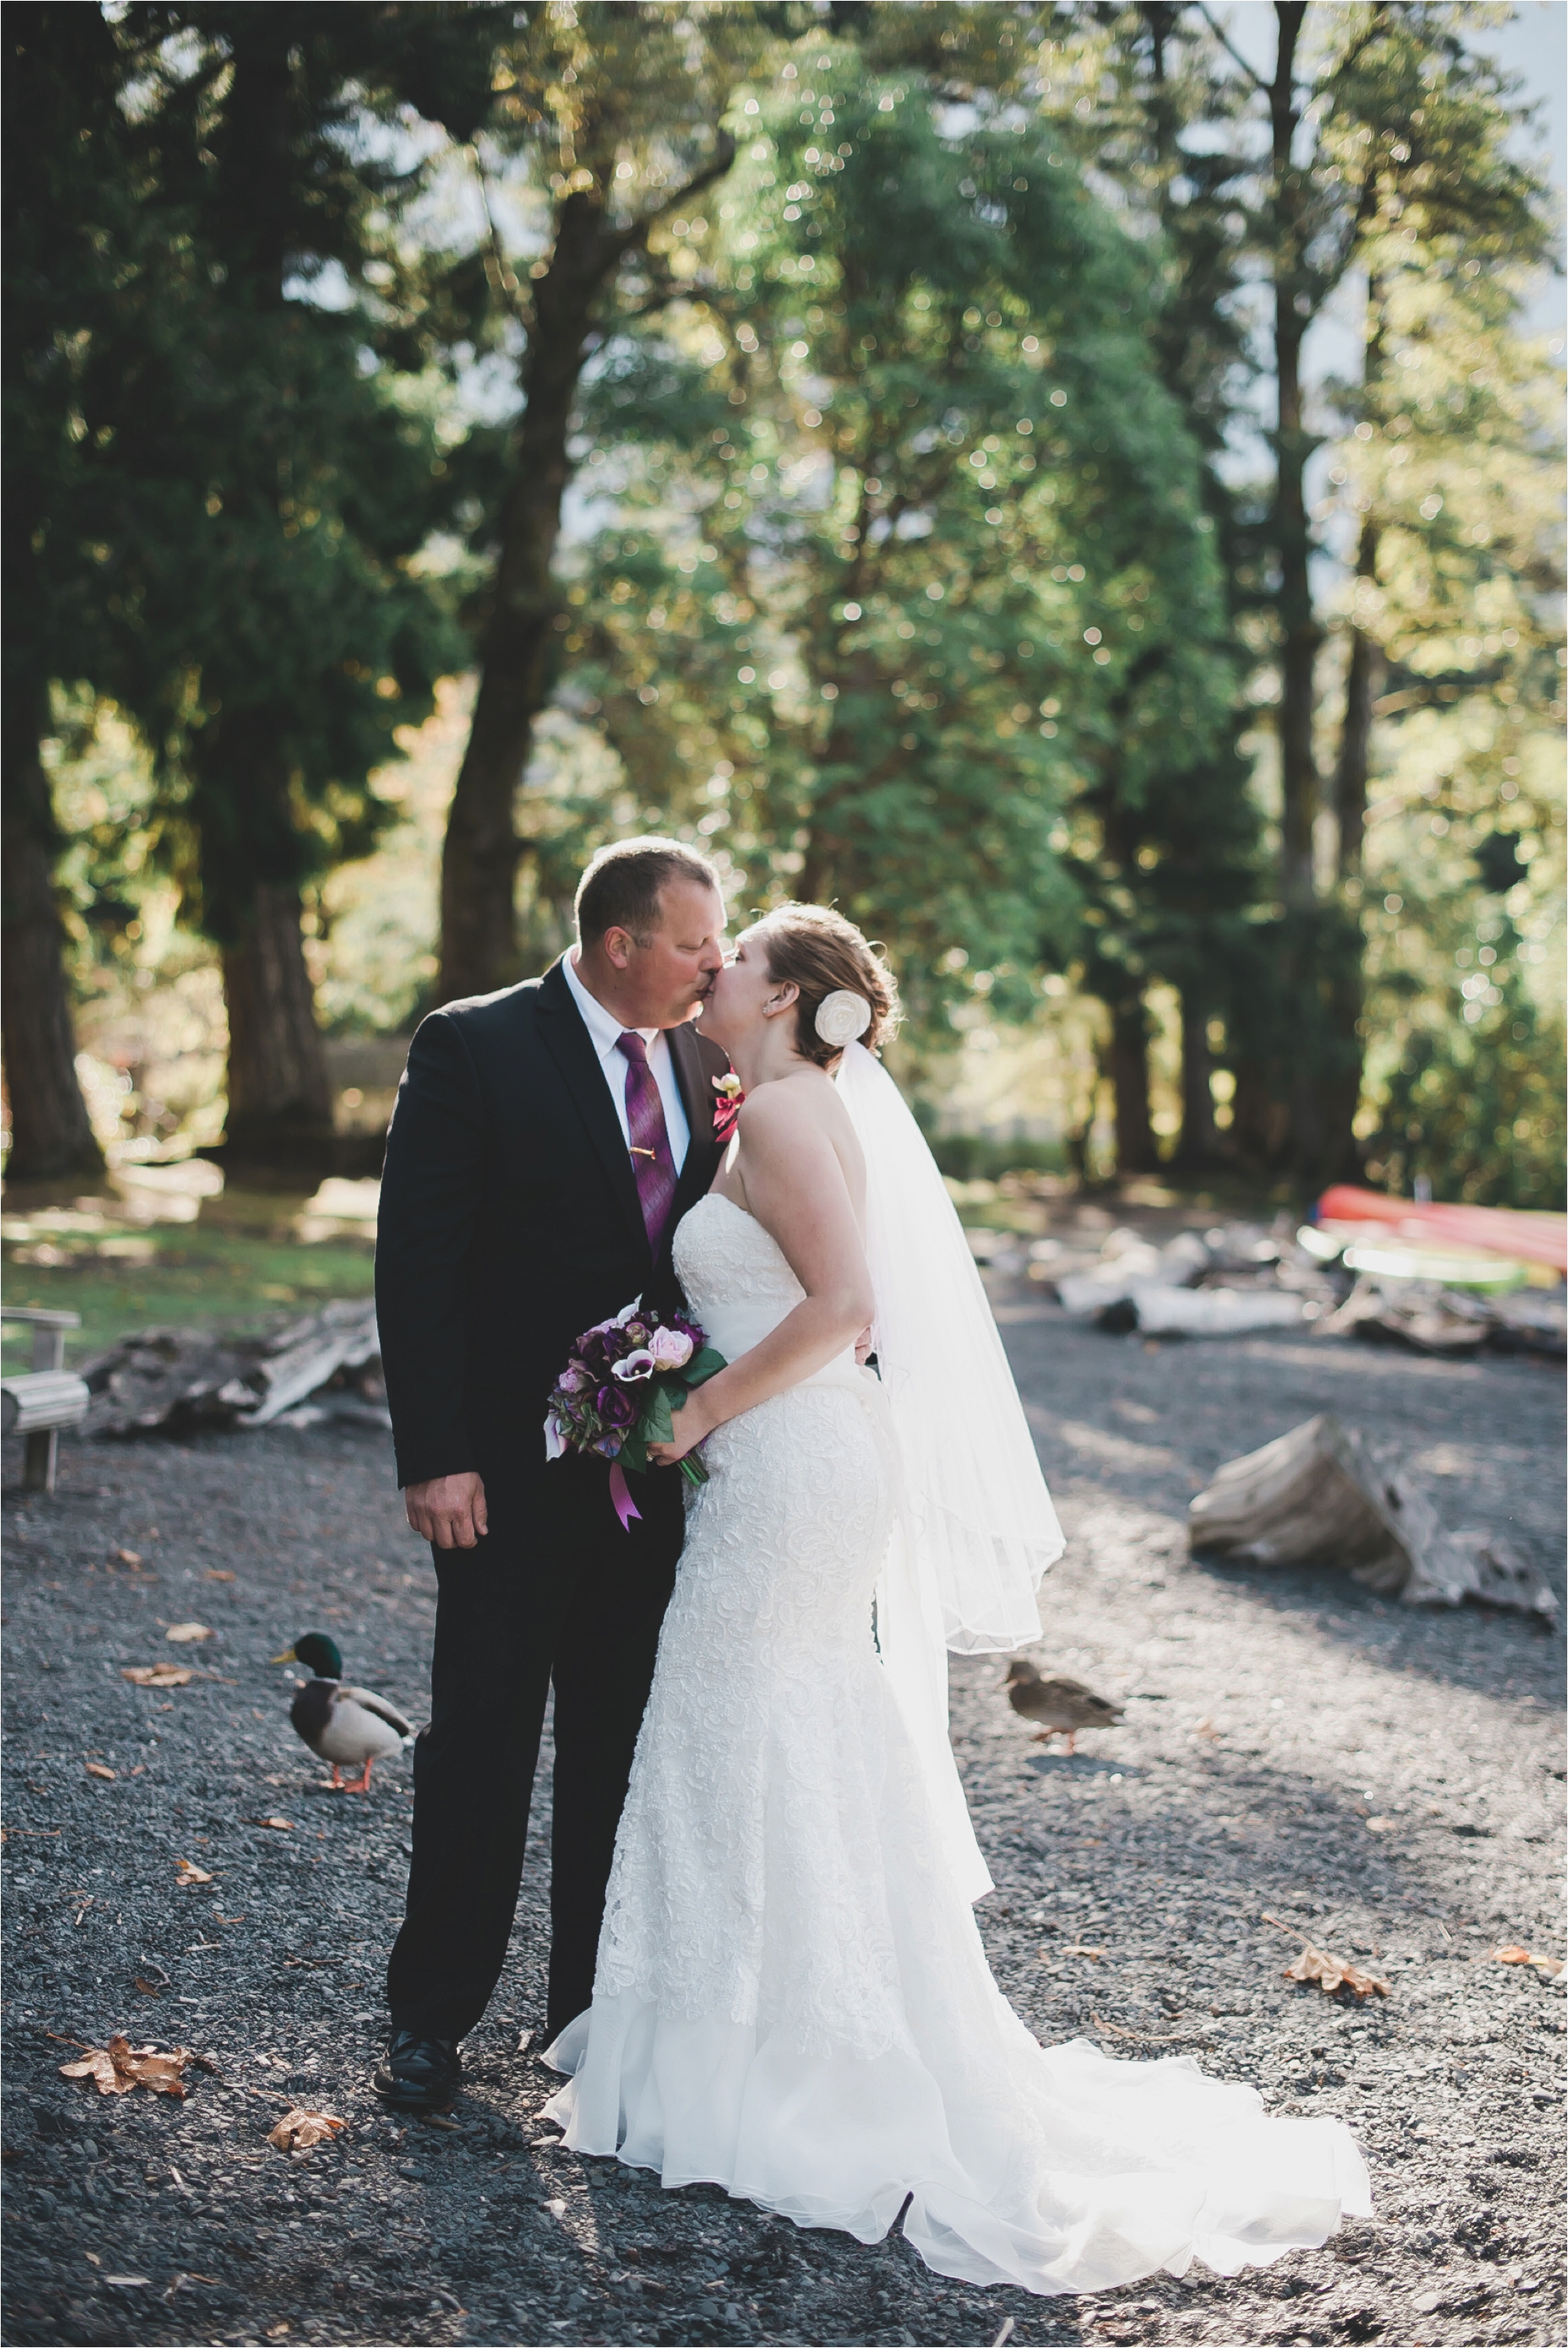 Lake Crescent Bride and Groom Portraits in Autumn Olympic National Park